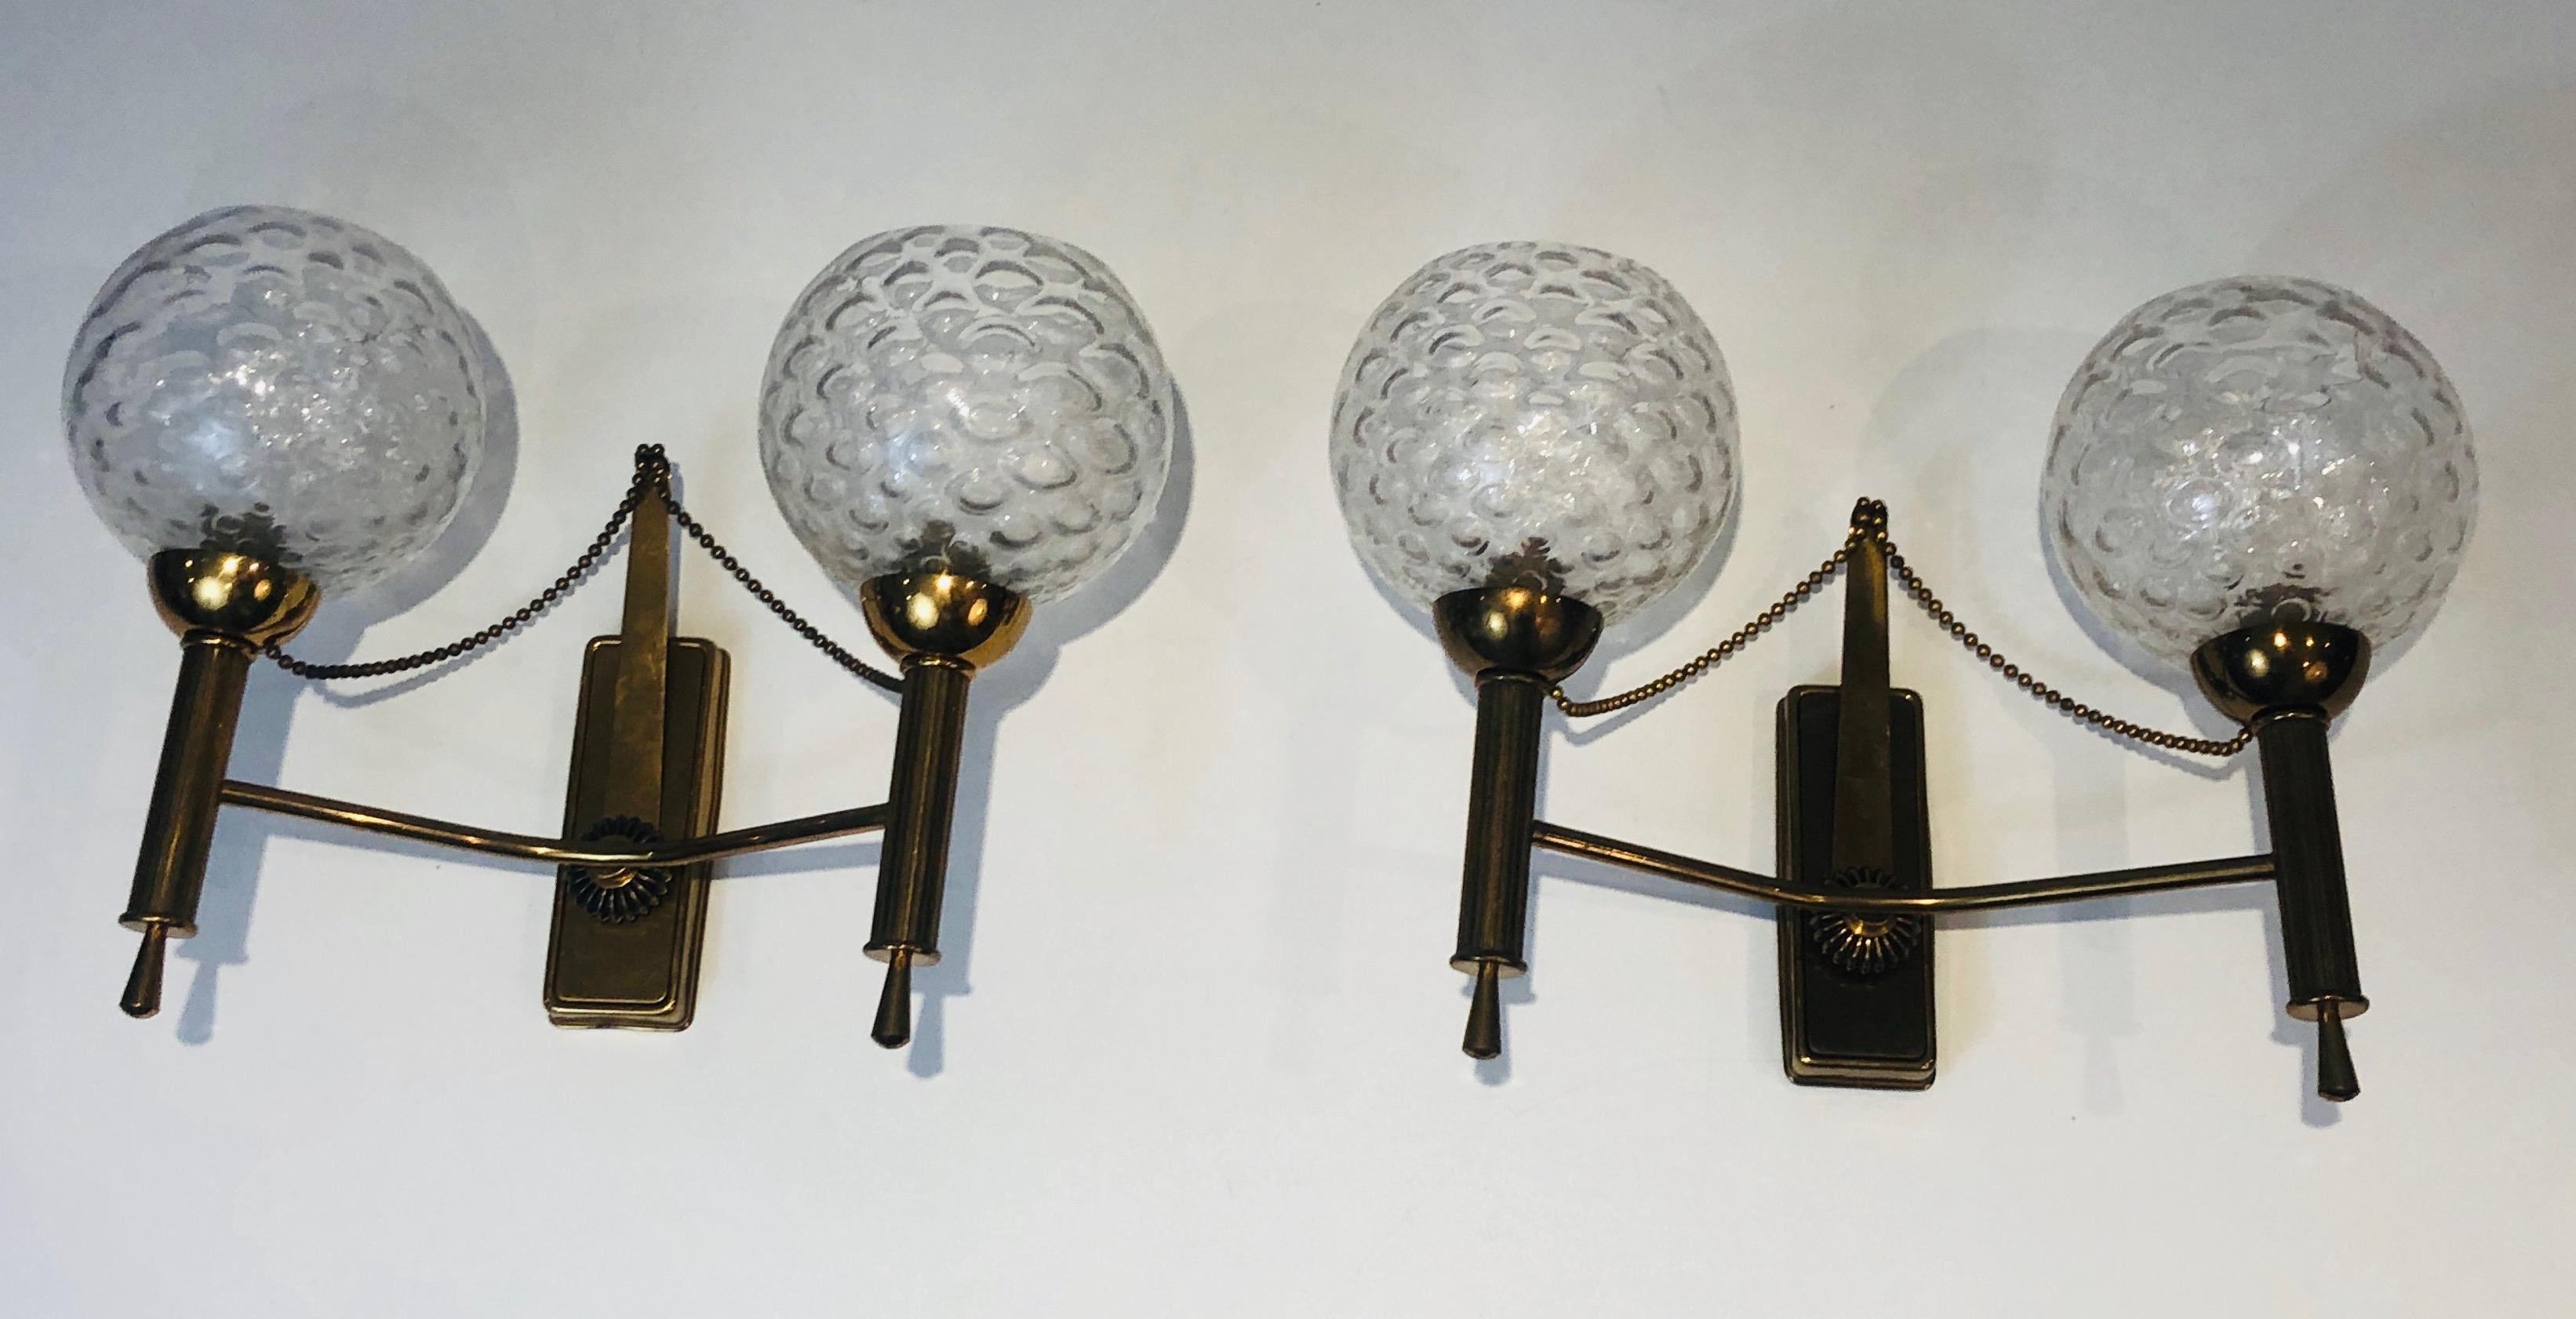 Pair of Brass and Glass Bowls Wall Sconces, French Work, Circa 1970 For Sale 8